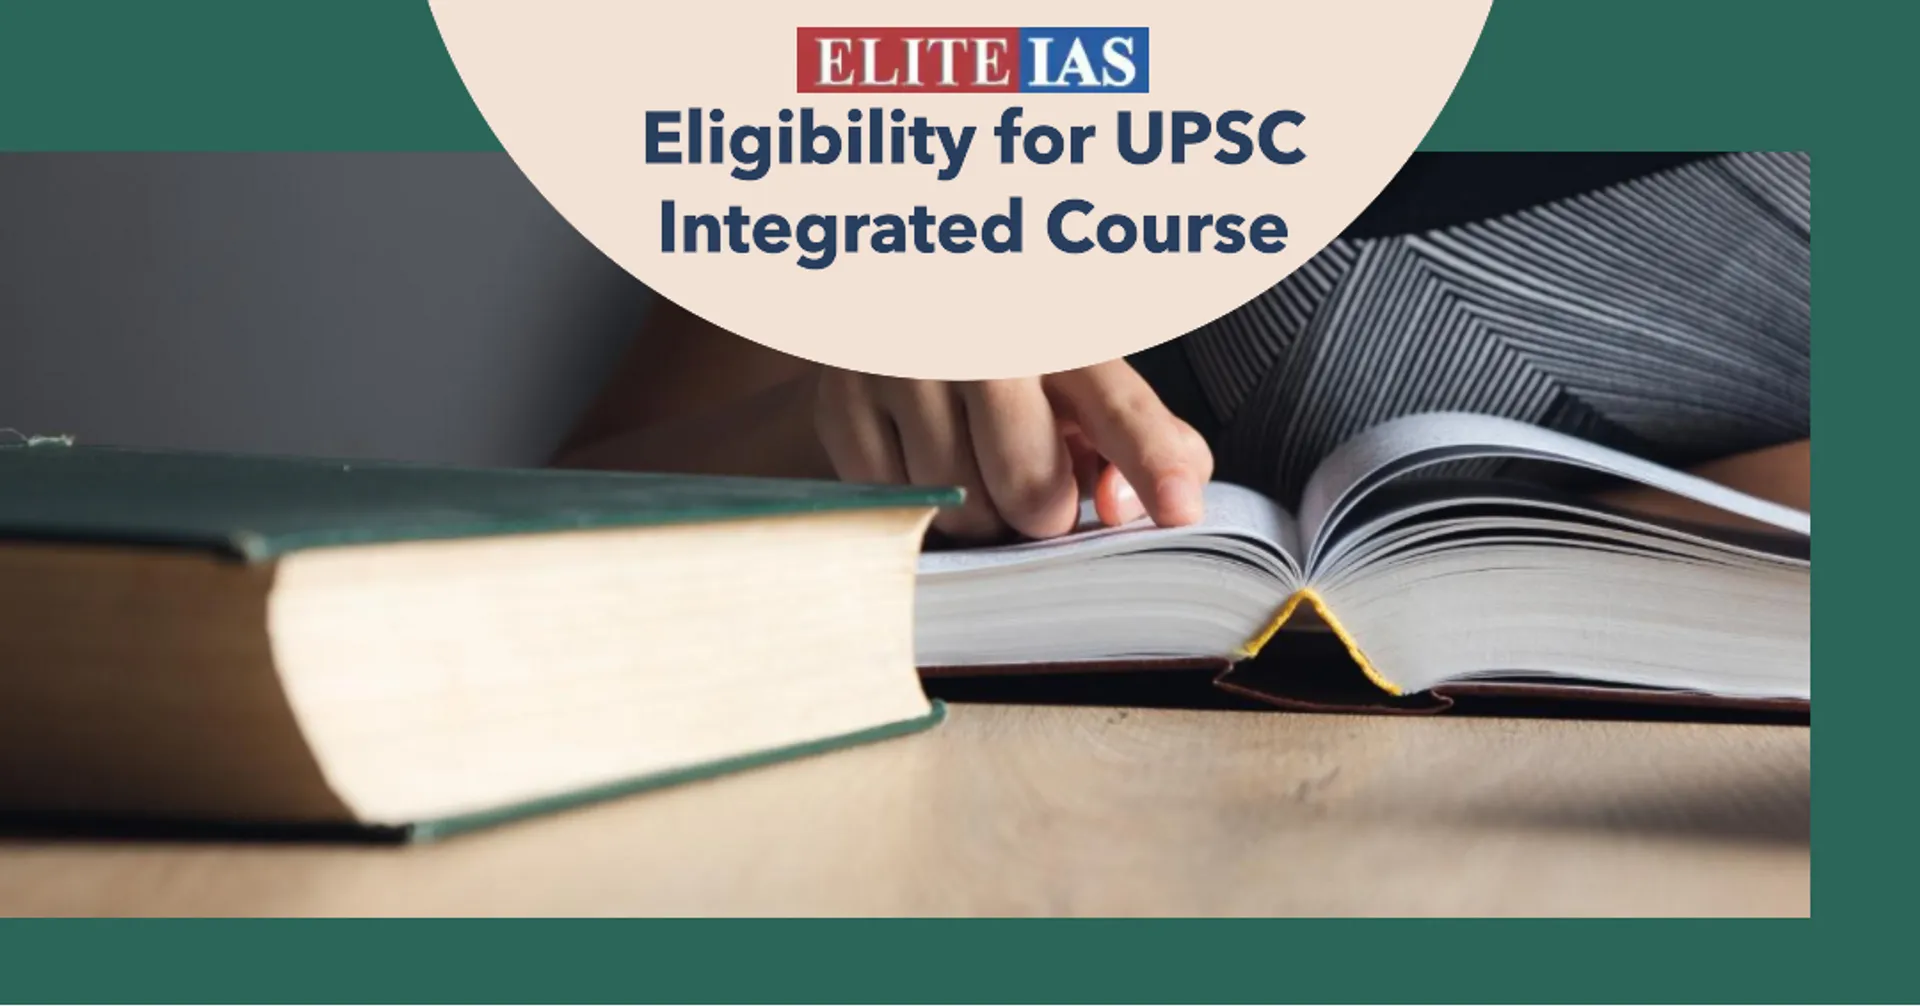 Eligibility for UPSC Integrated Course

The IAS coaching fees at Elite IAS in Delhi may vary depending on the course and duration. For detailed information on fees and courses offered, please visit their website or contact them directly. Elite IAS is known for its quality coaching and guidance for aspiring civil servants.

https://www.eliteias.in/student-zone/fee-structure/